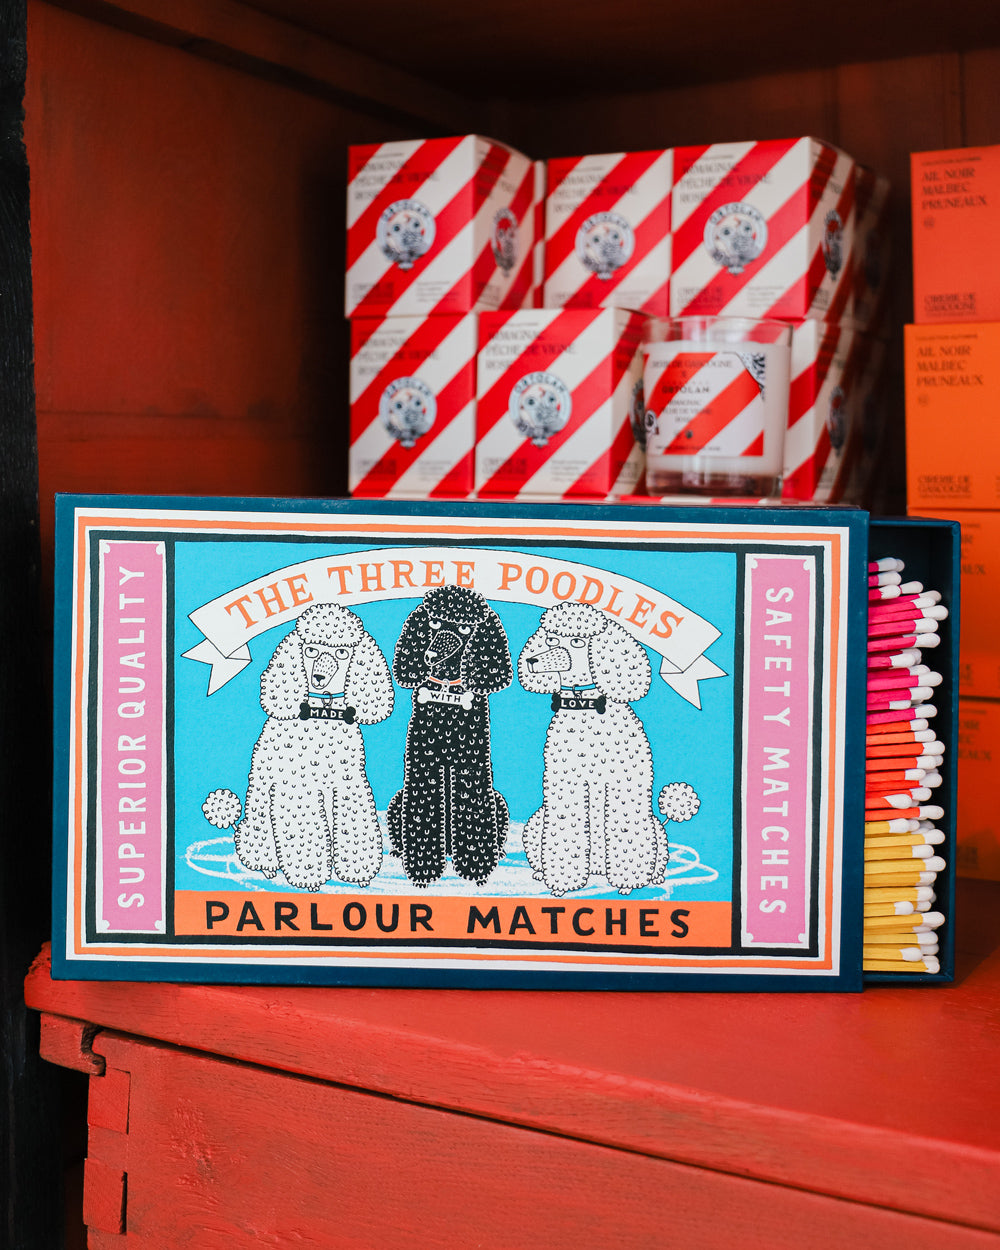 Archivist Gallery Giant Three Poodle Luxury Matches